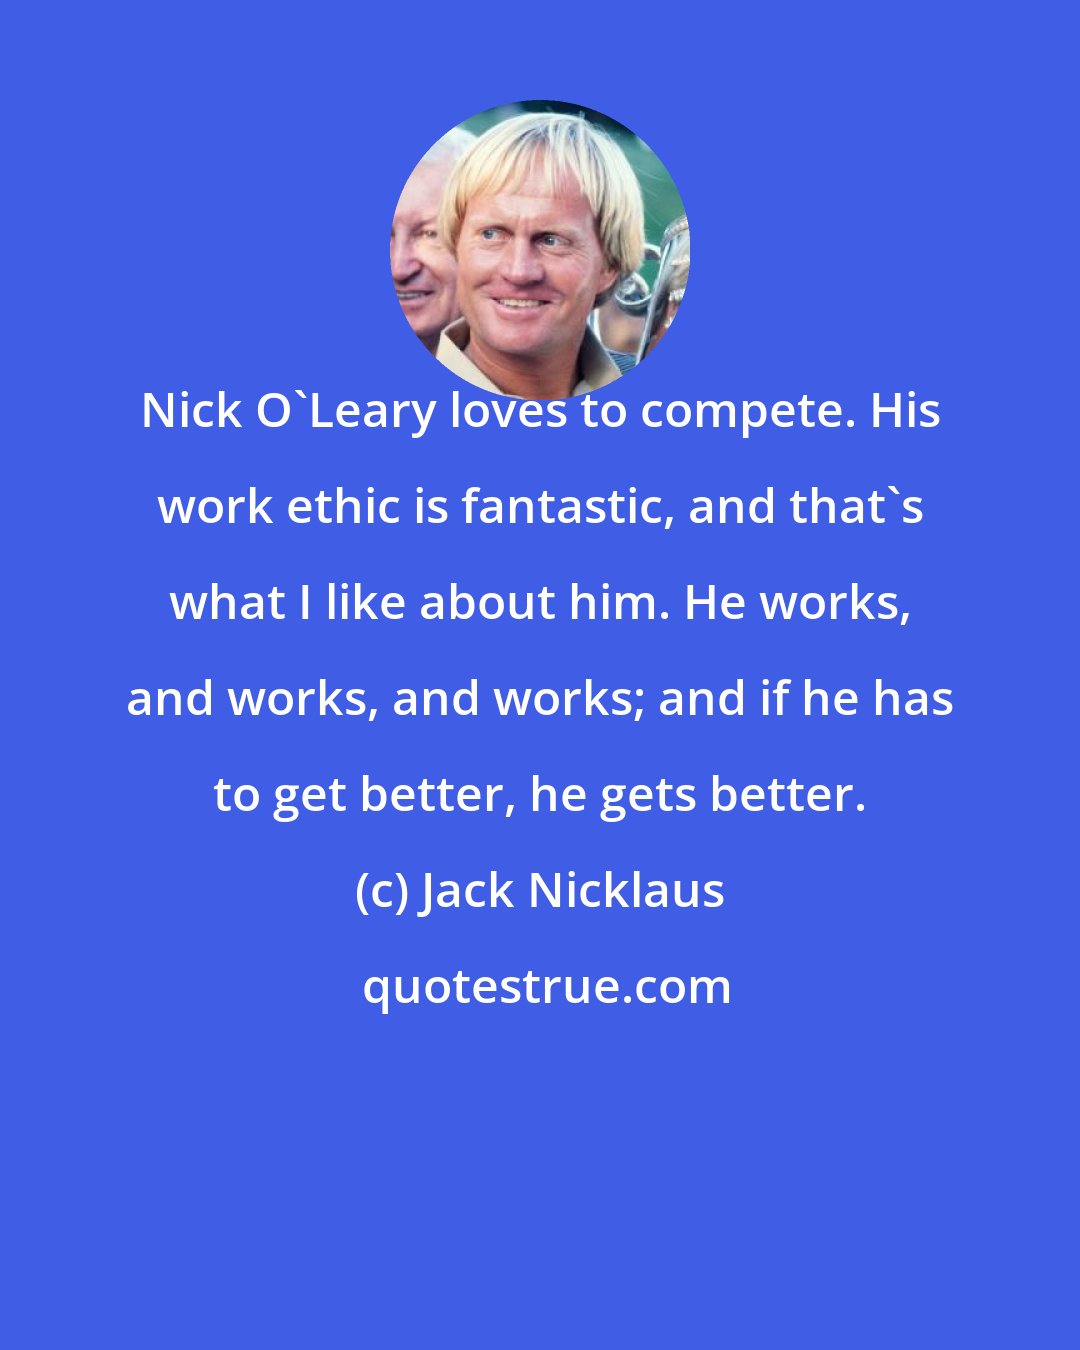 Jack Nicklaus: Nick O'Leary loves to compete. His work ethic is fantastic, and that's what I like about him. He works, and works, and works; and if he has to get better, he gets better.